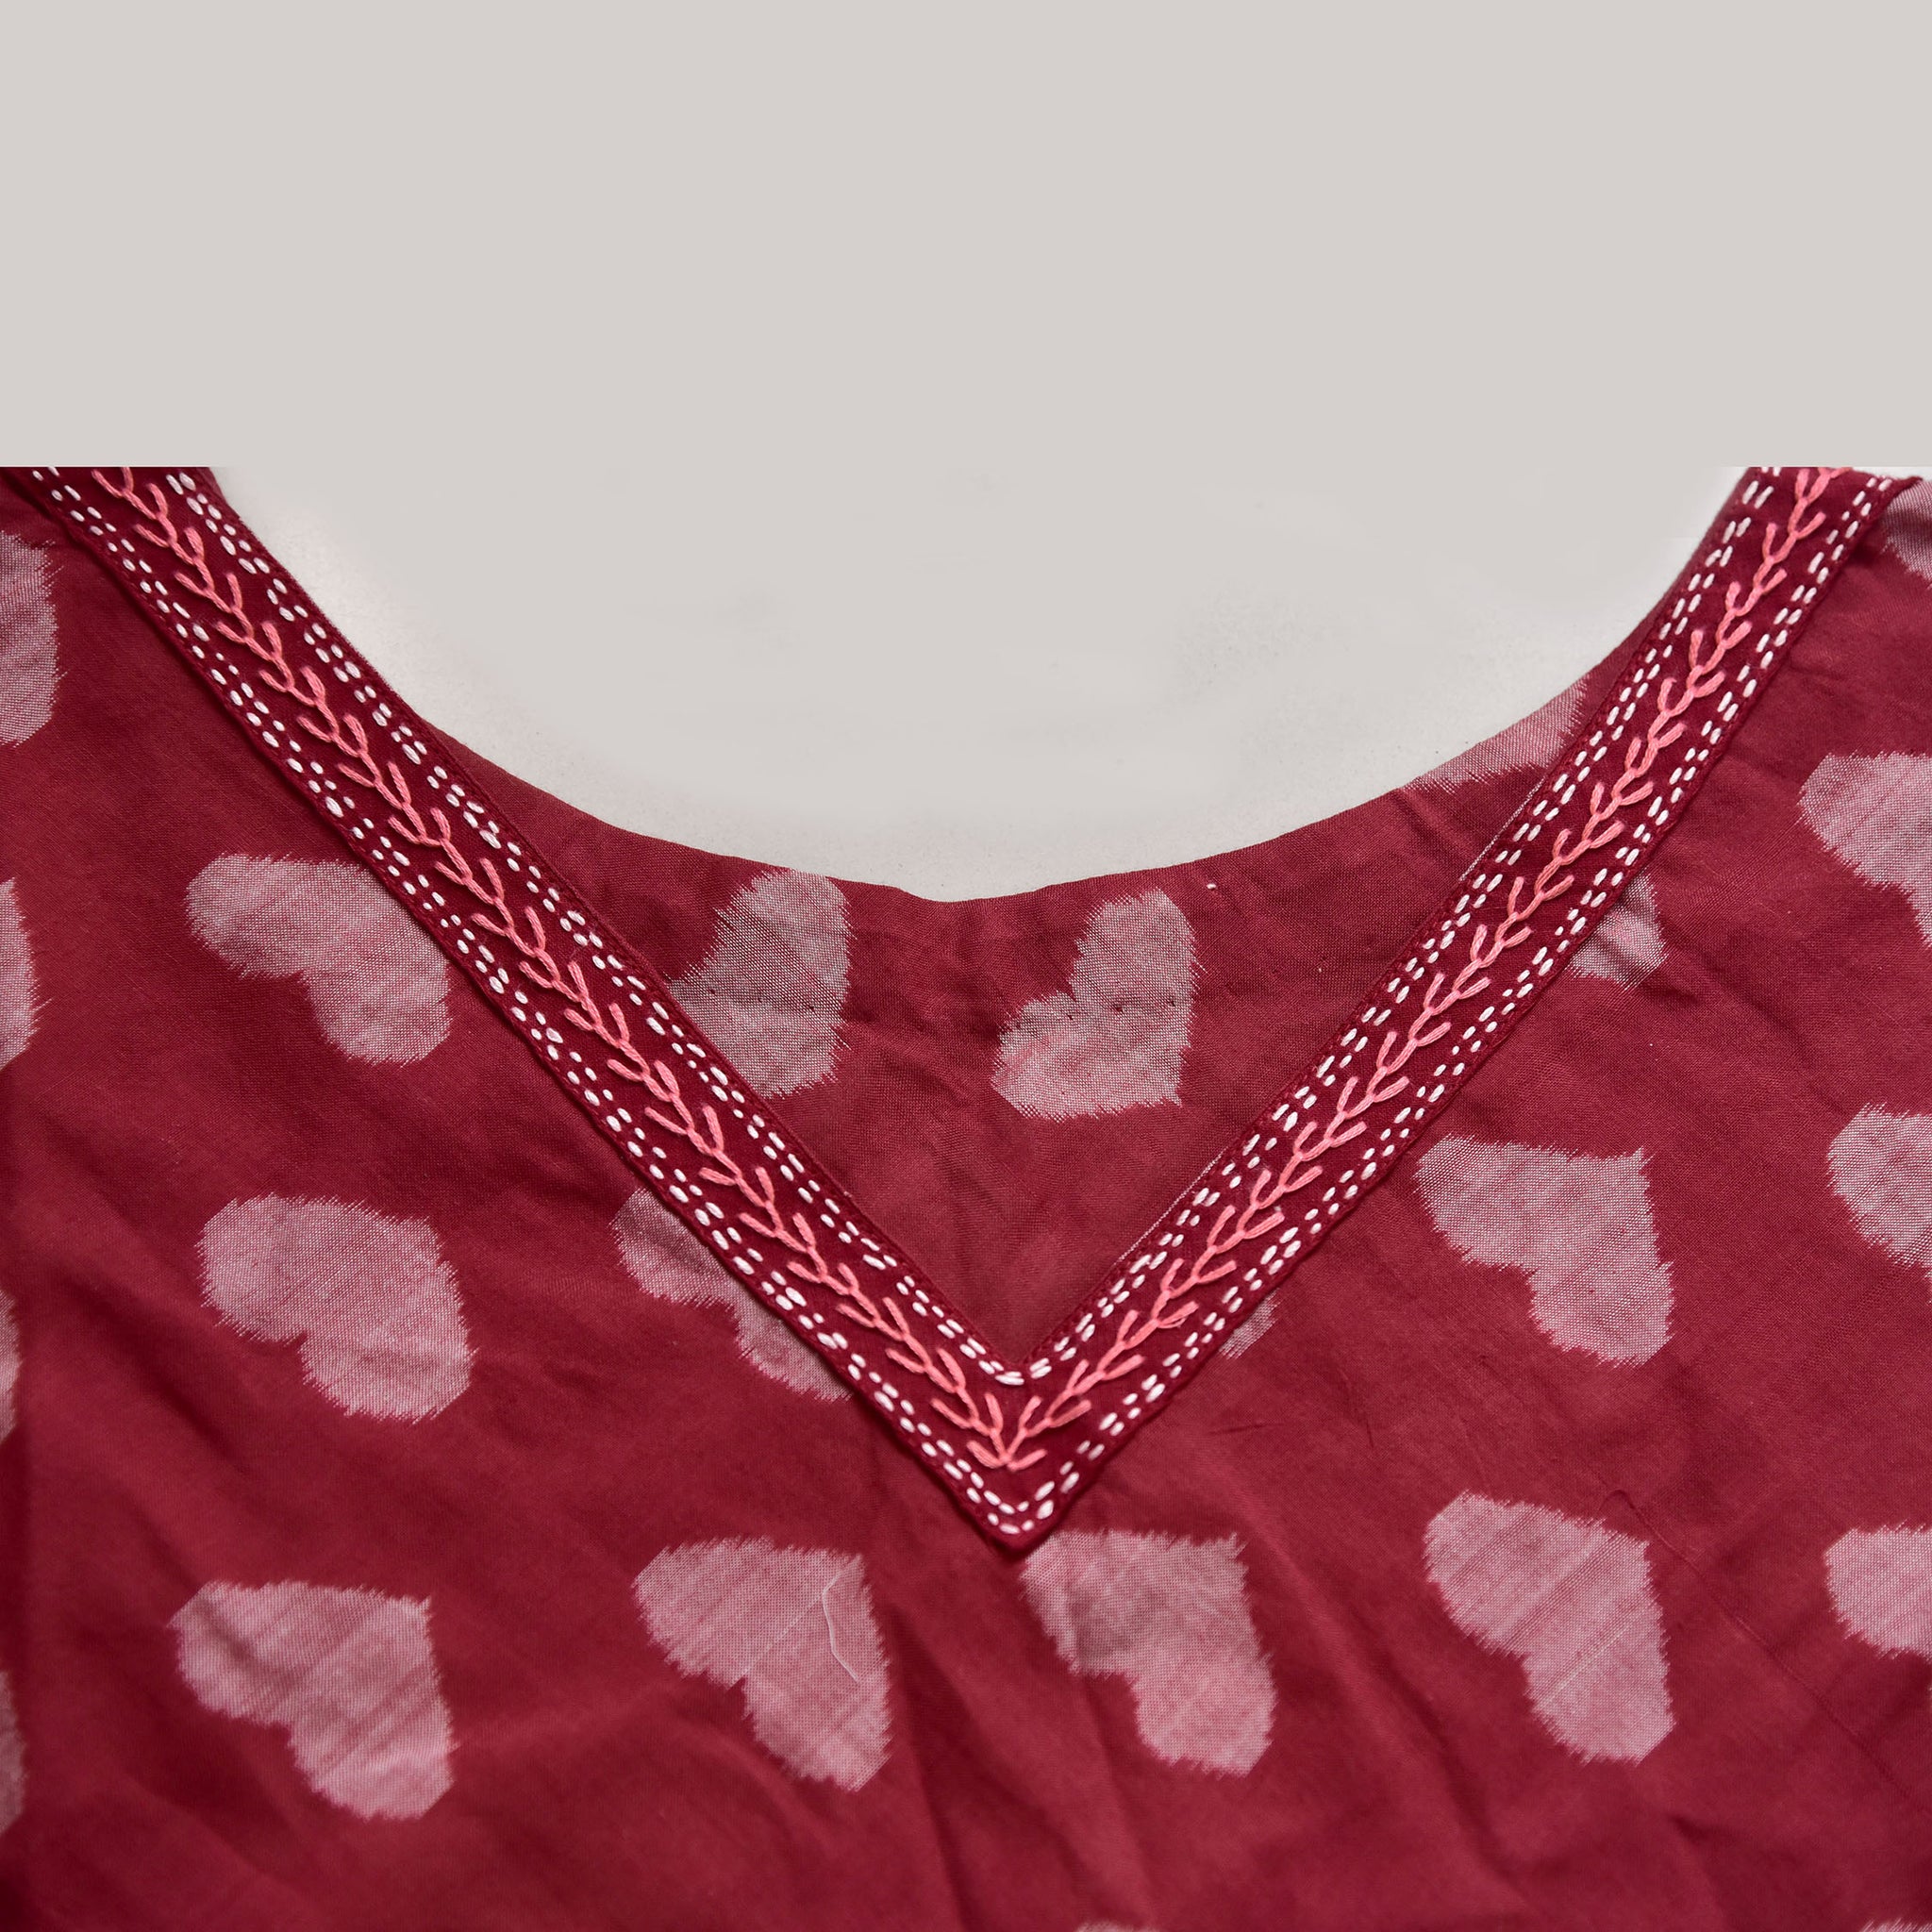 Sambalpuri triangle maroon ikat poncho with allover taash hearts and hand embroidery detailing on neck